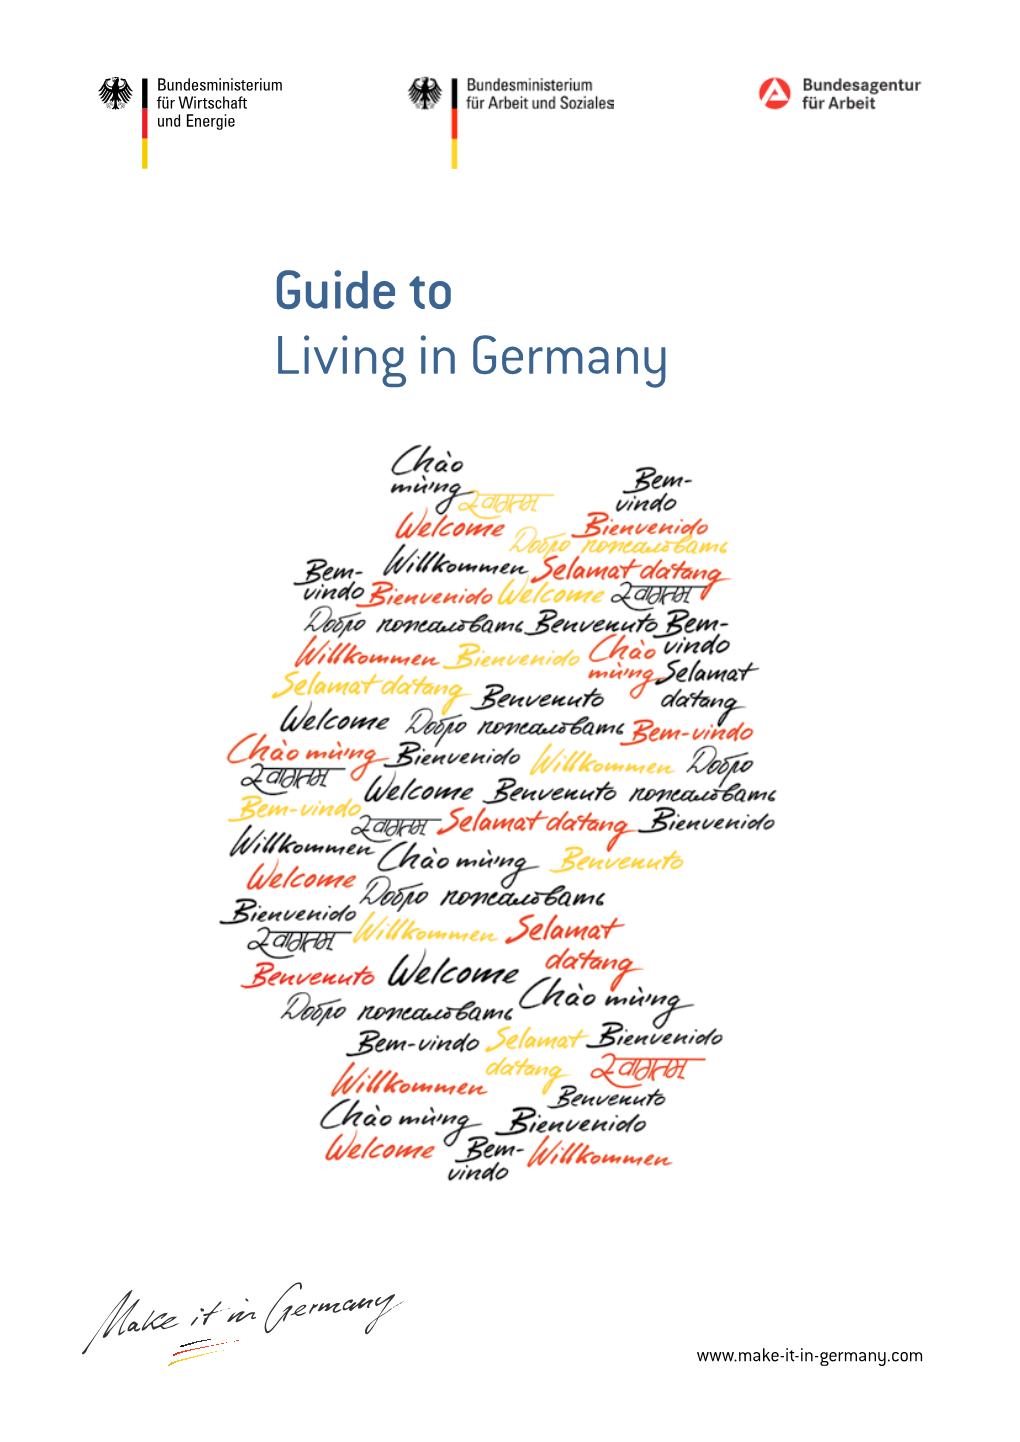 Guide to Living in Germany